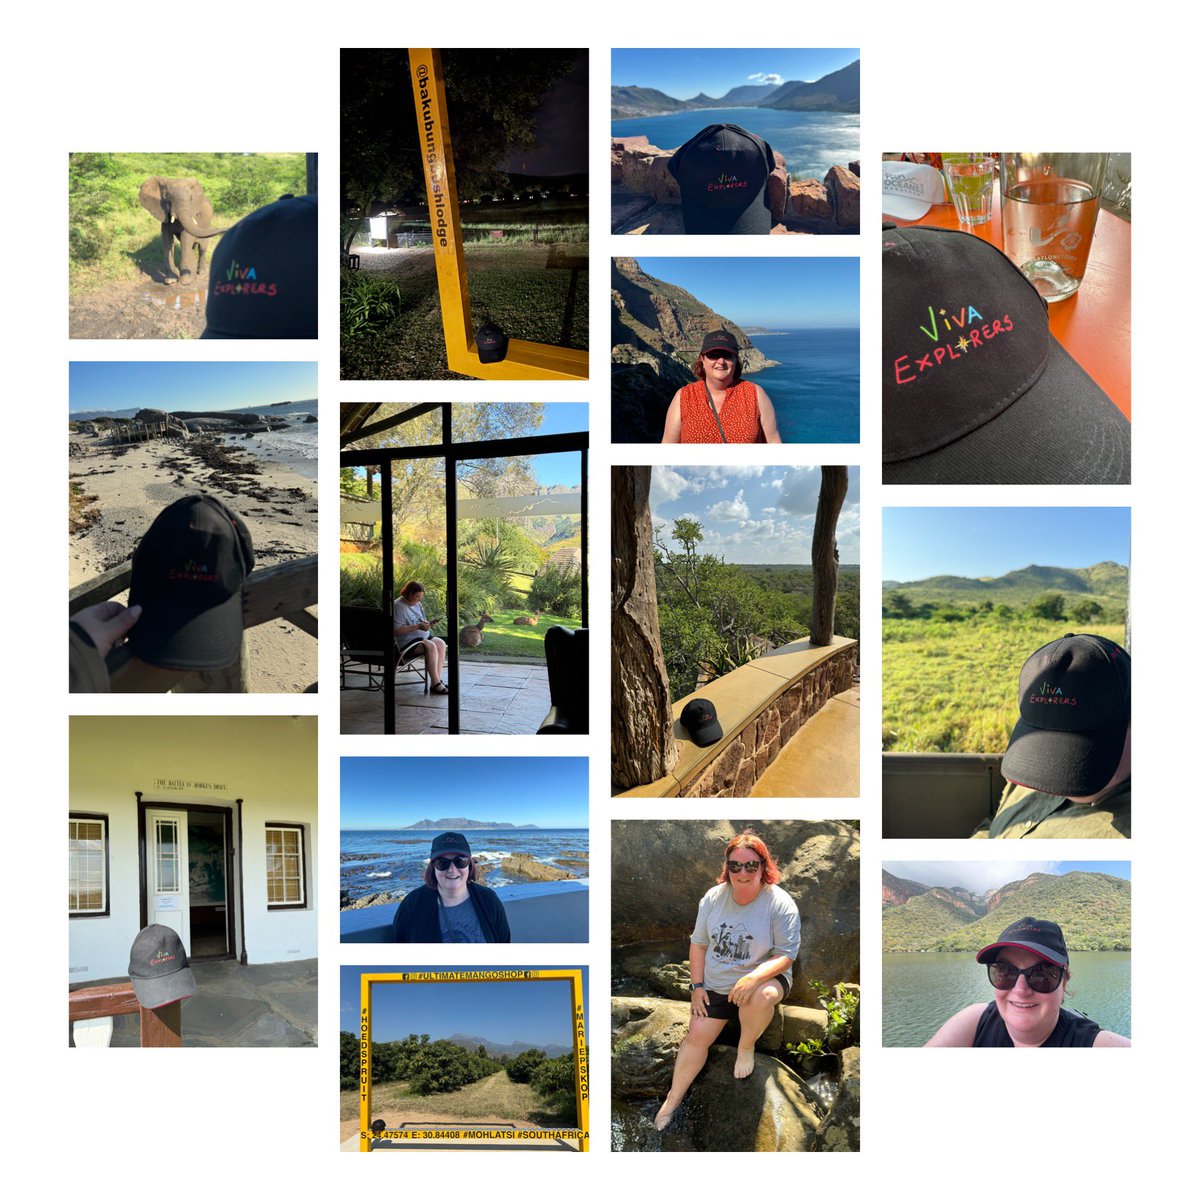 The @VivaExplorers hat & I had a lovely holiday in South Africa but now it’s back to work. Got a full week of training but I’ll also need catching up on those messages you’ve left me! It’s going to be a busy one #ReturnToWork